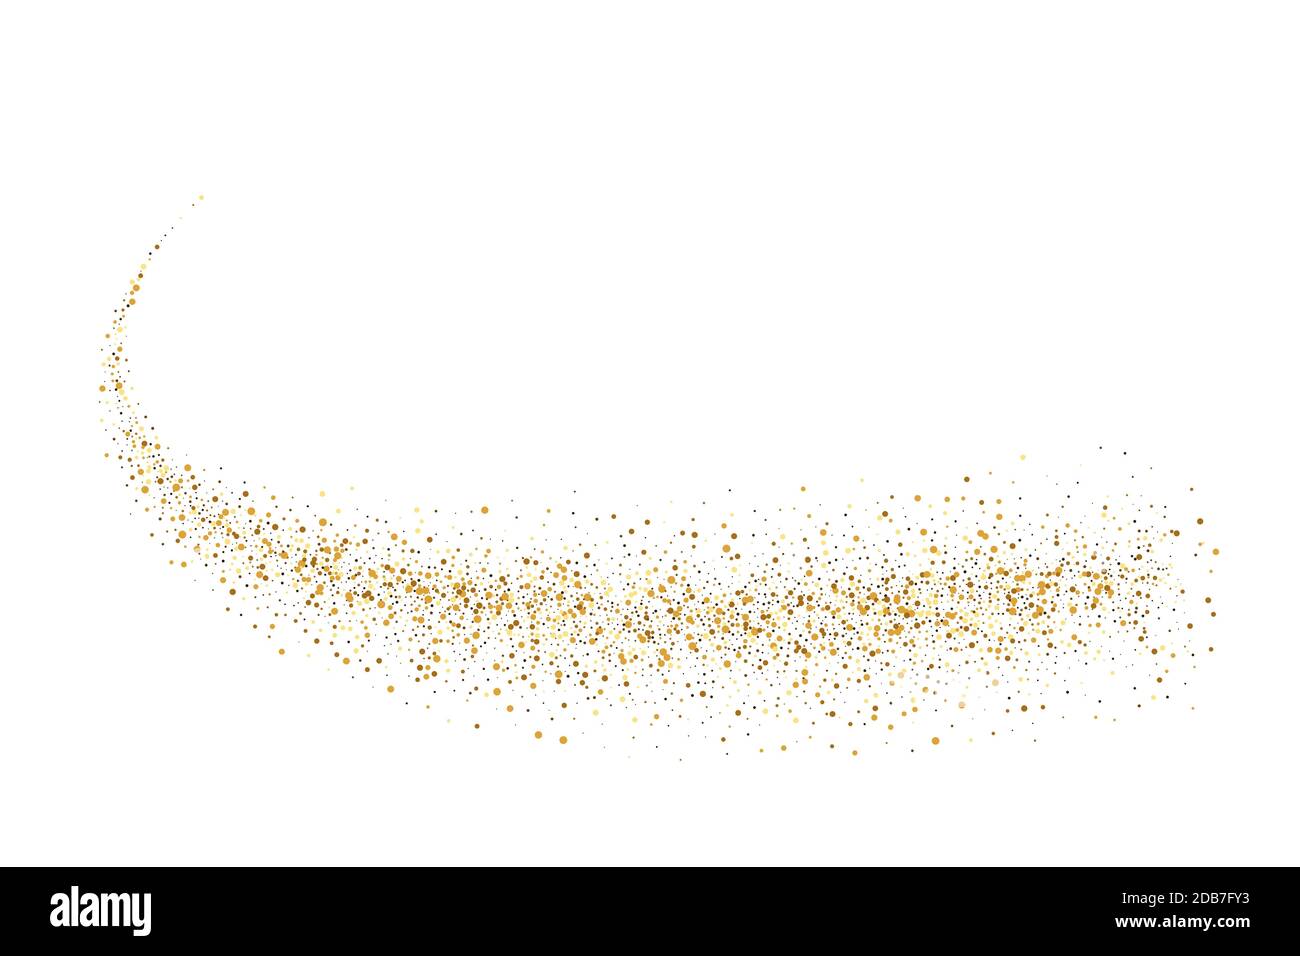 Gold Glitter Shiny Holiday Confetti On White Background Vector Stock  Illustration - Download Image Now - iStock